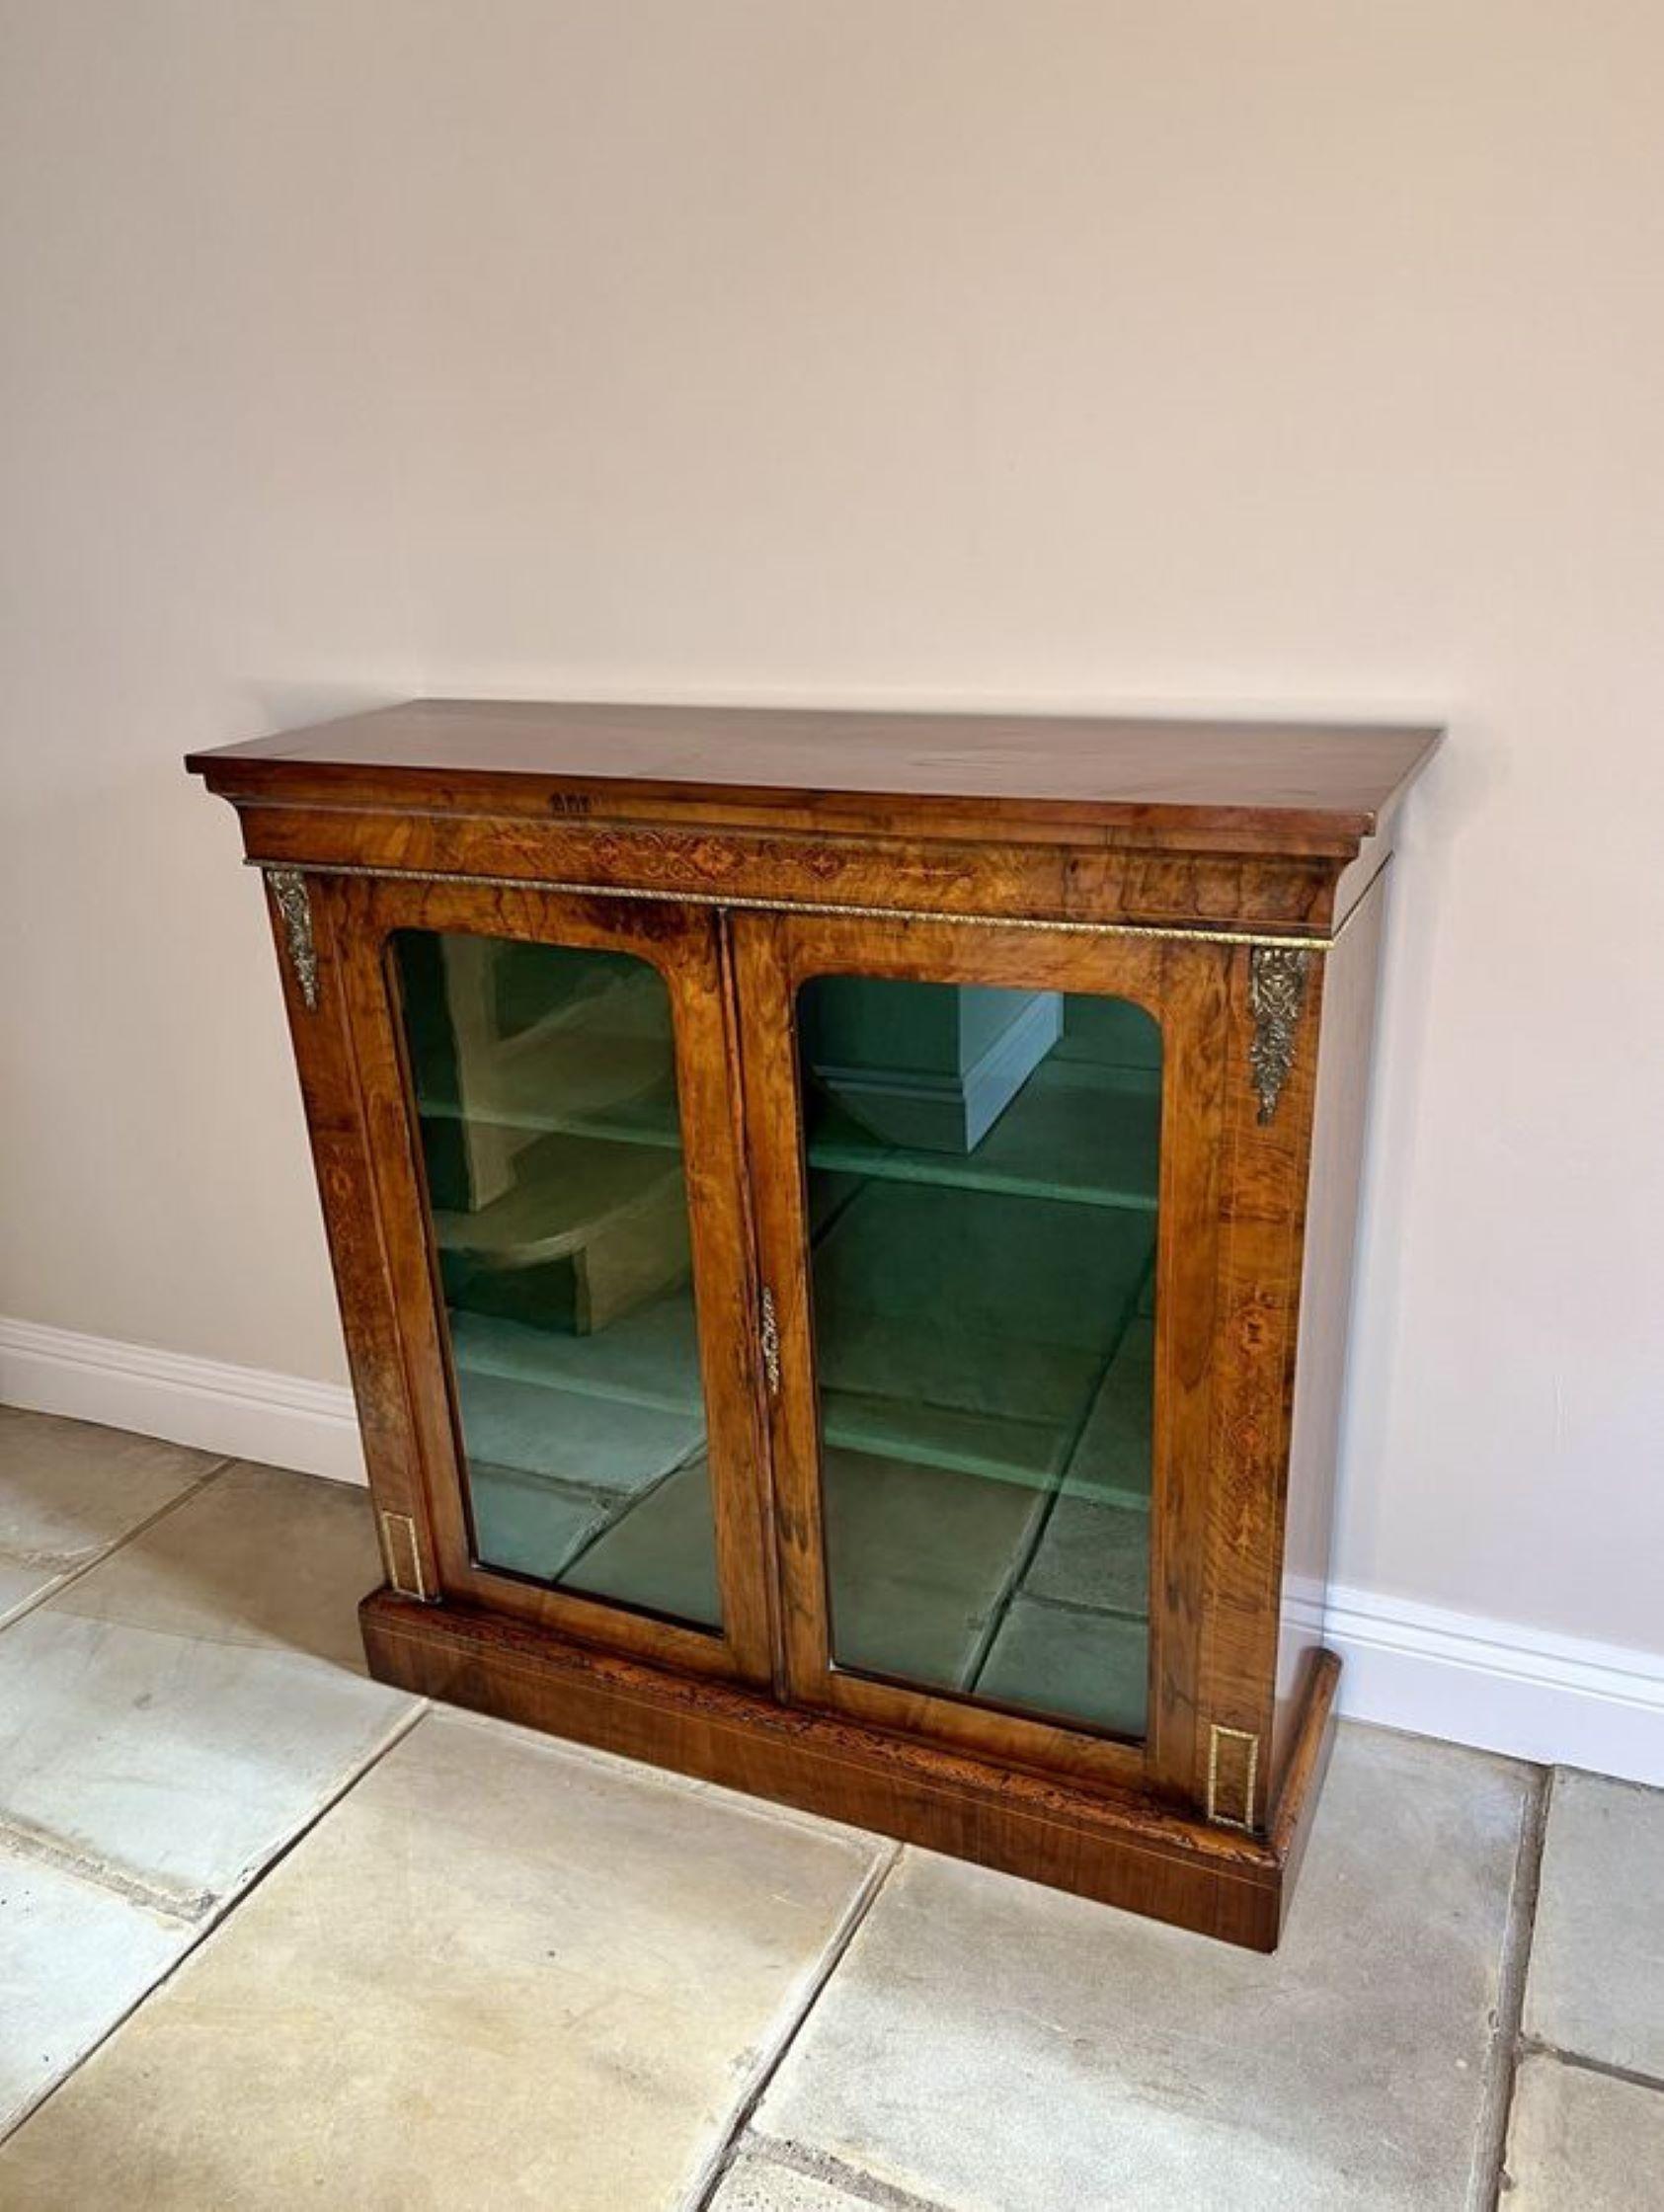 Fantastic quality antique Victorian walnut inlaid pier cabinet, having a fantastic quality antique Victorian walnut inlaid pier cabinet with stunning gilt metal mounts, having a rectangular walnut top above a pair of glazed doors opening to reveal